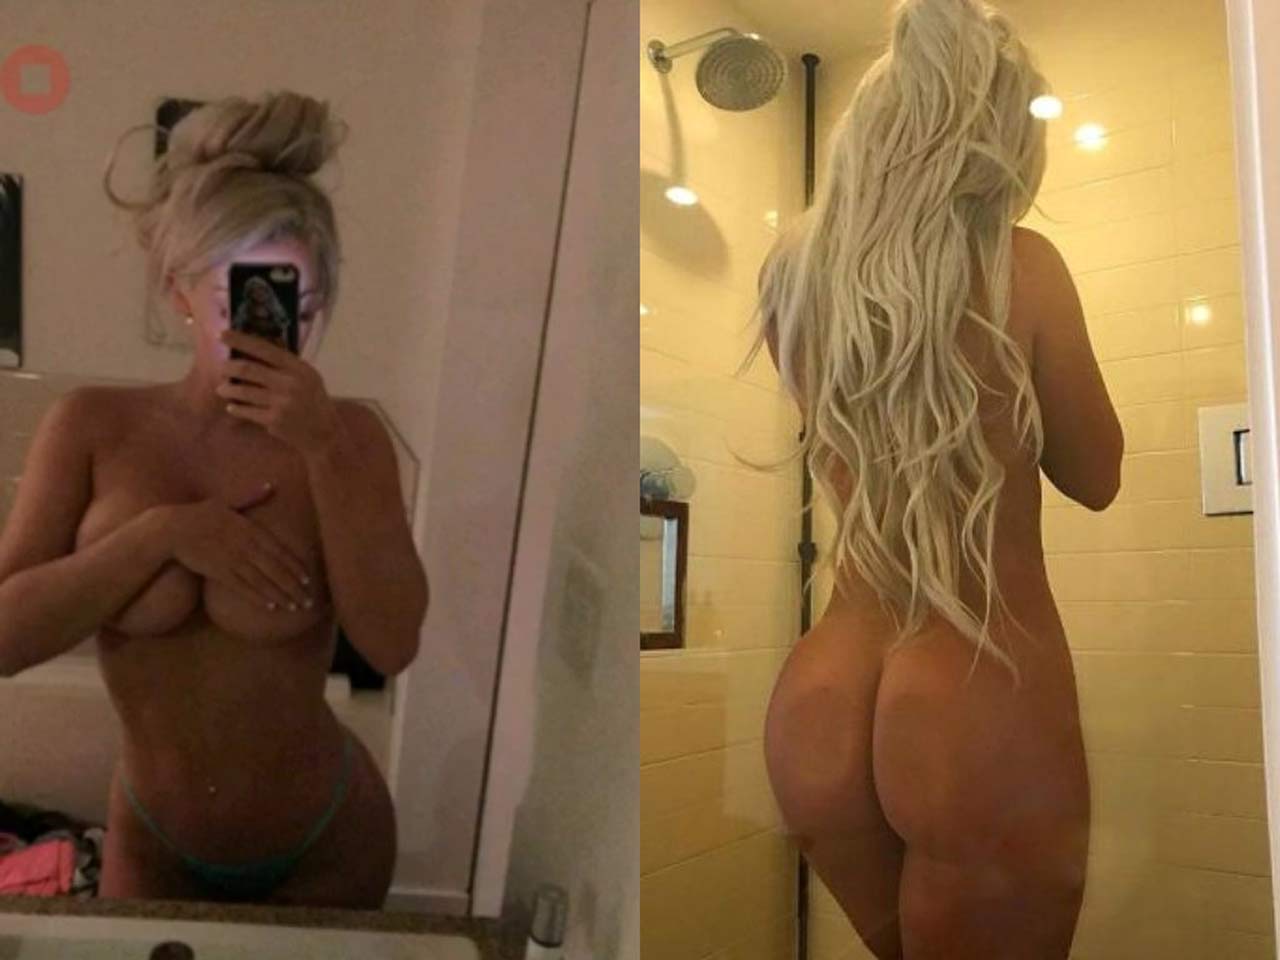 Laci somers nudes